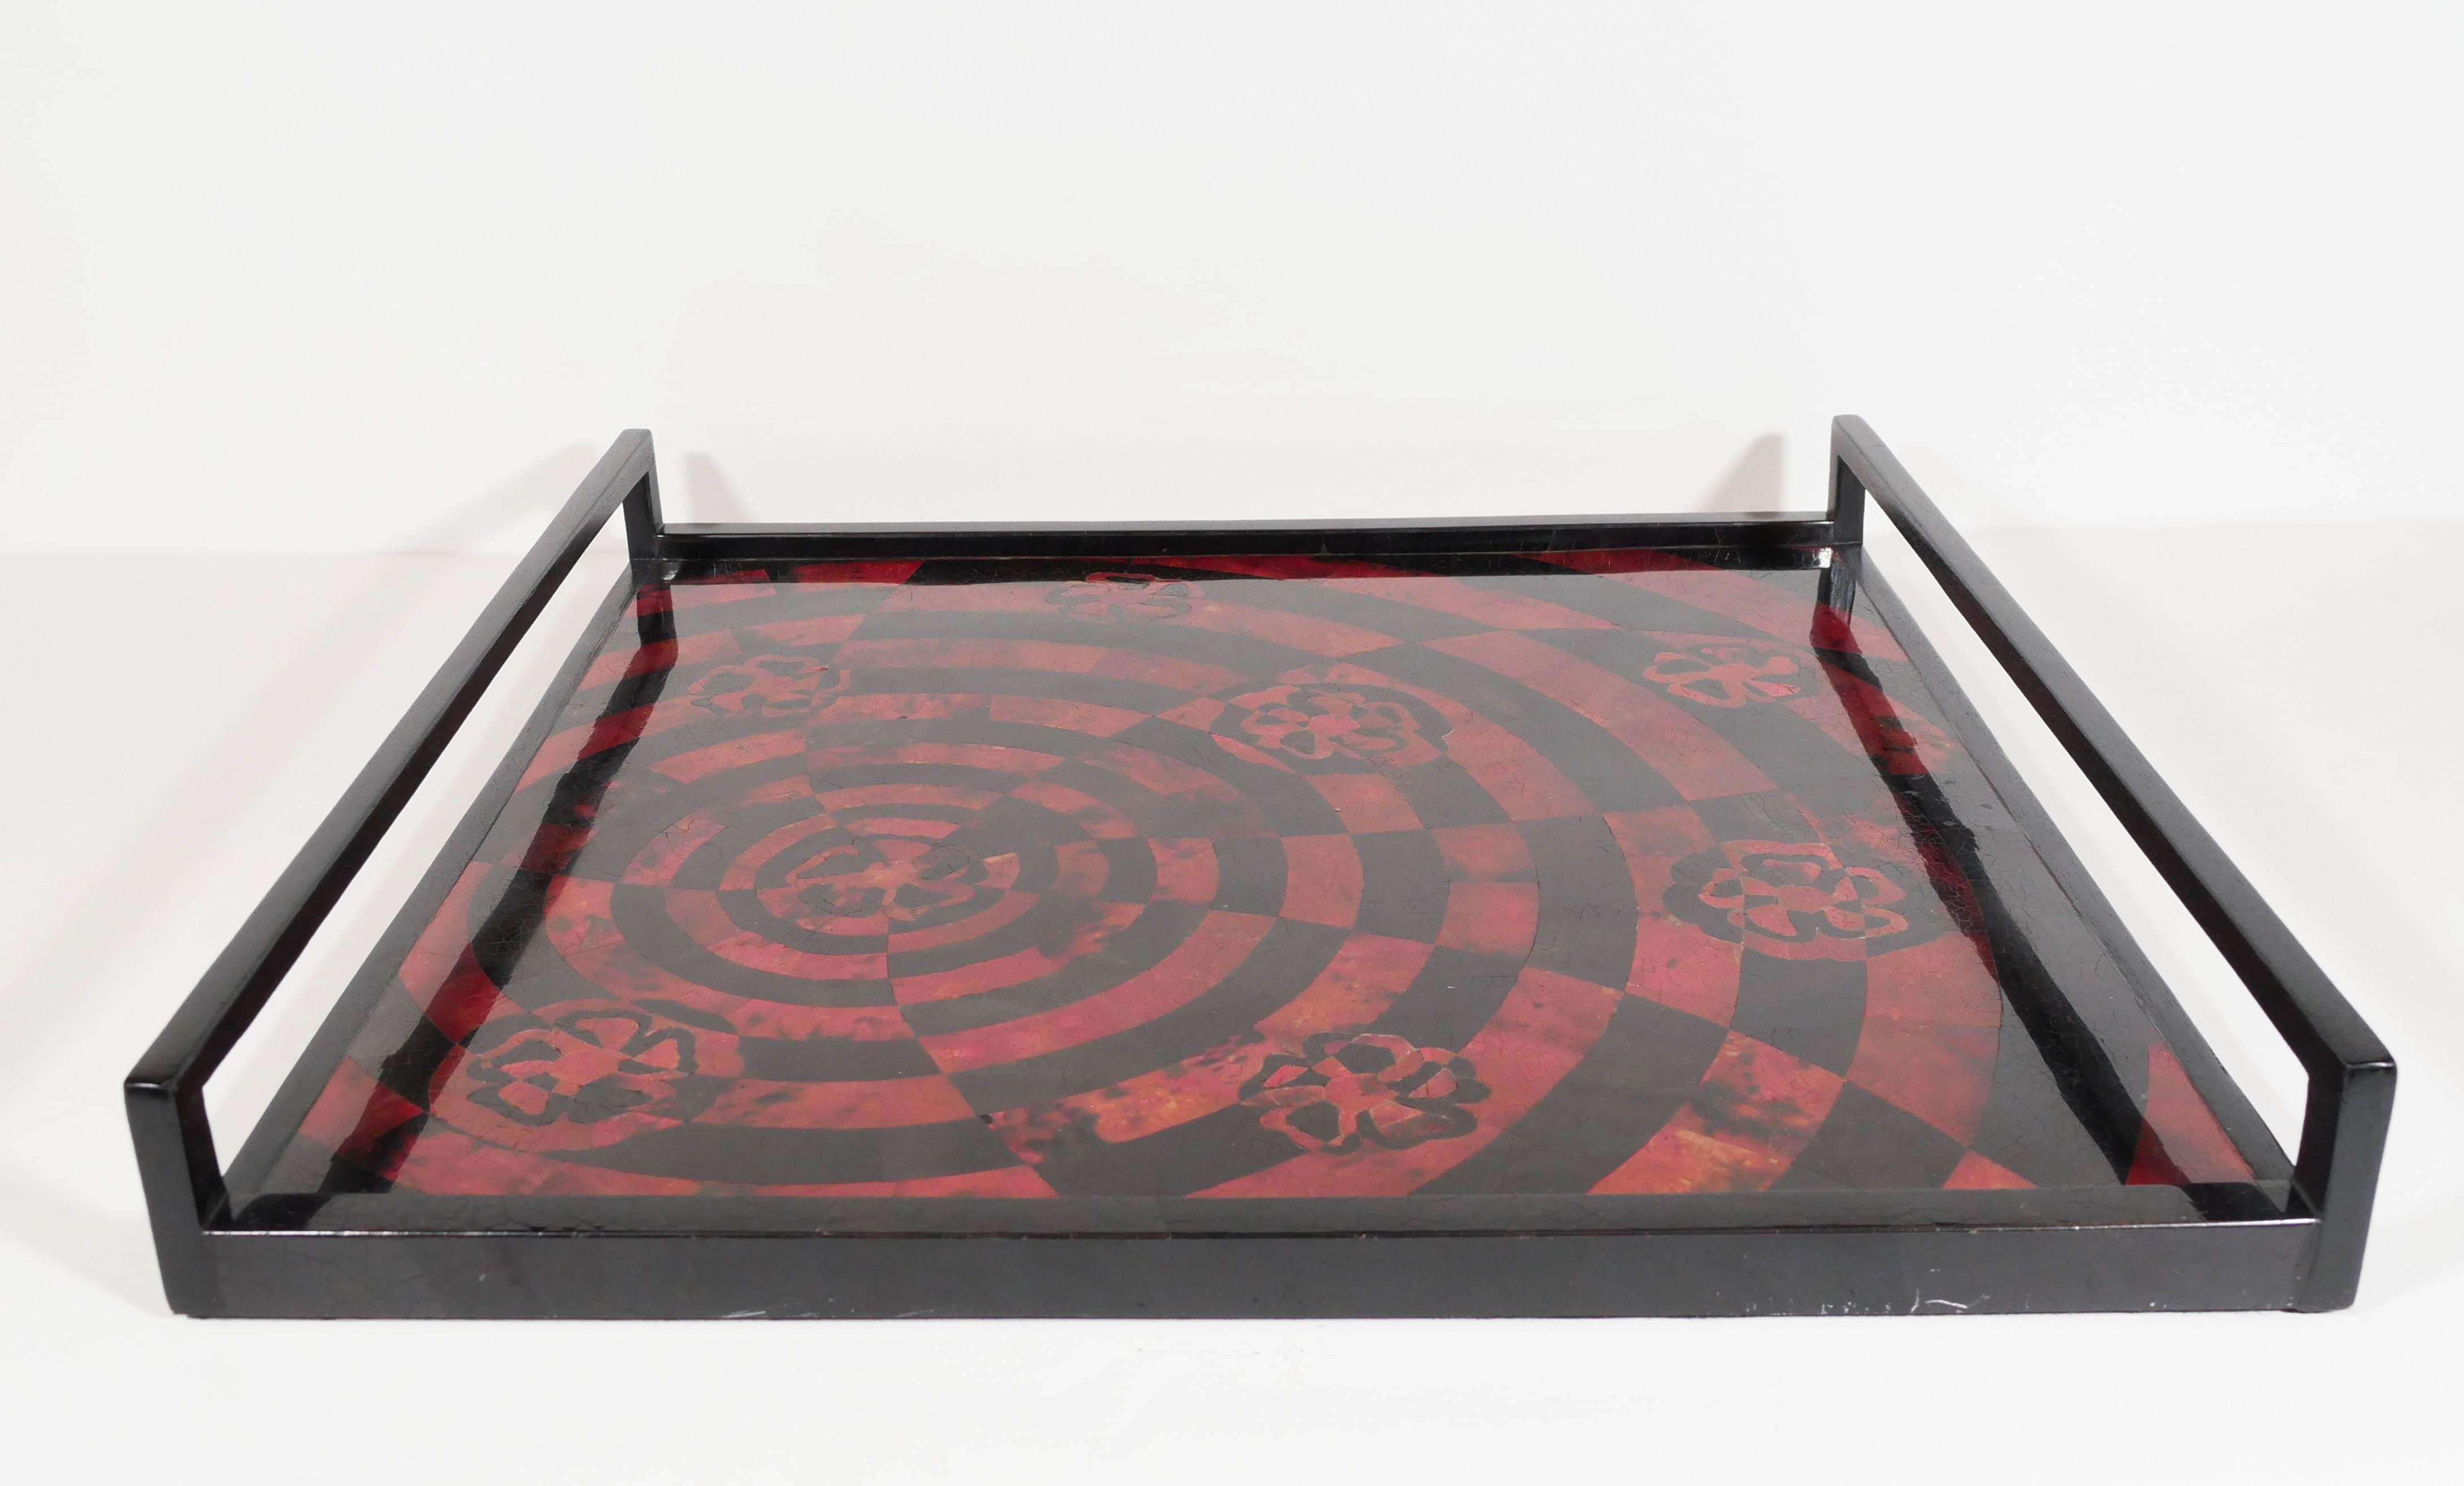 Exotic pen shell tray in opulent tones of red and black.  Hand-dyed and lacquered, featuring mosaic inlay top with geometric patterns. Handcrafted with handles in ebonized palmwood. Excellent addition to any barware set, or as a decorative tabletop